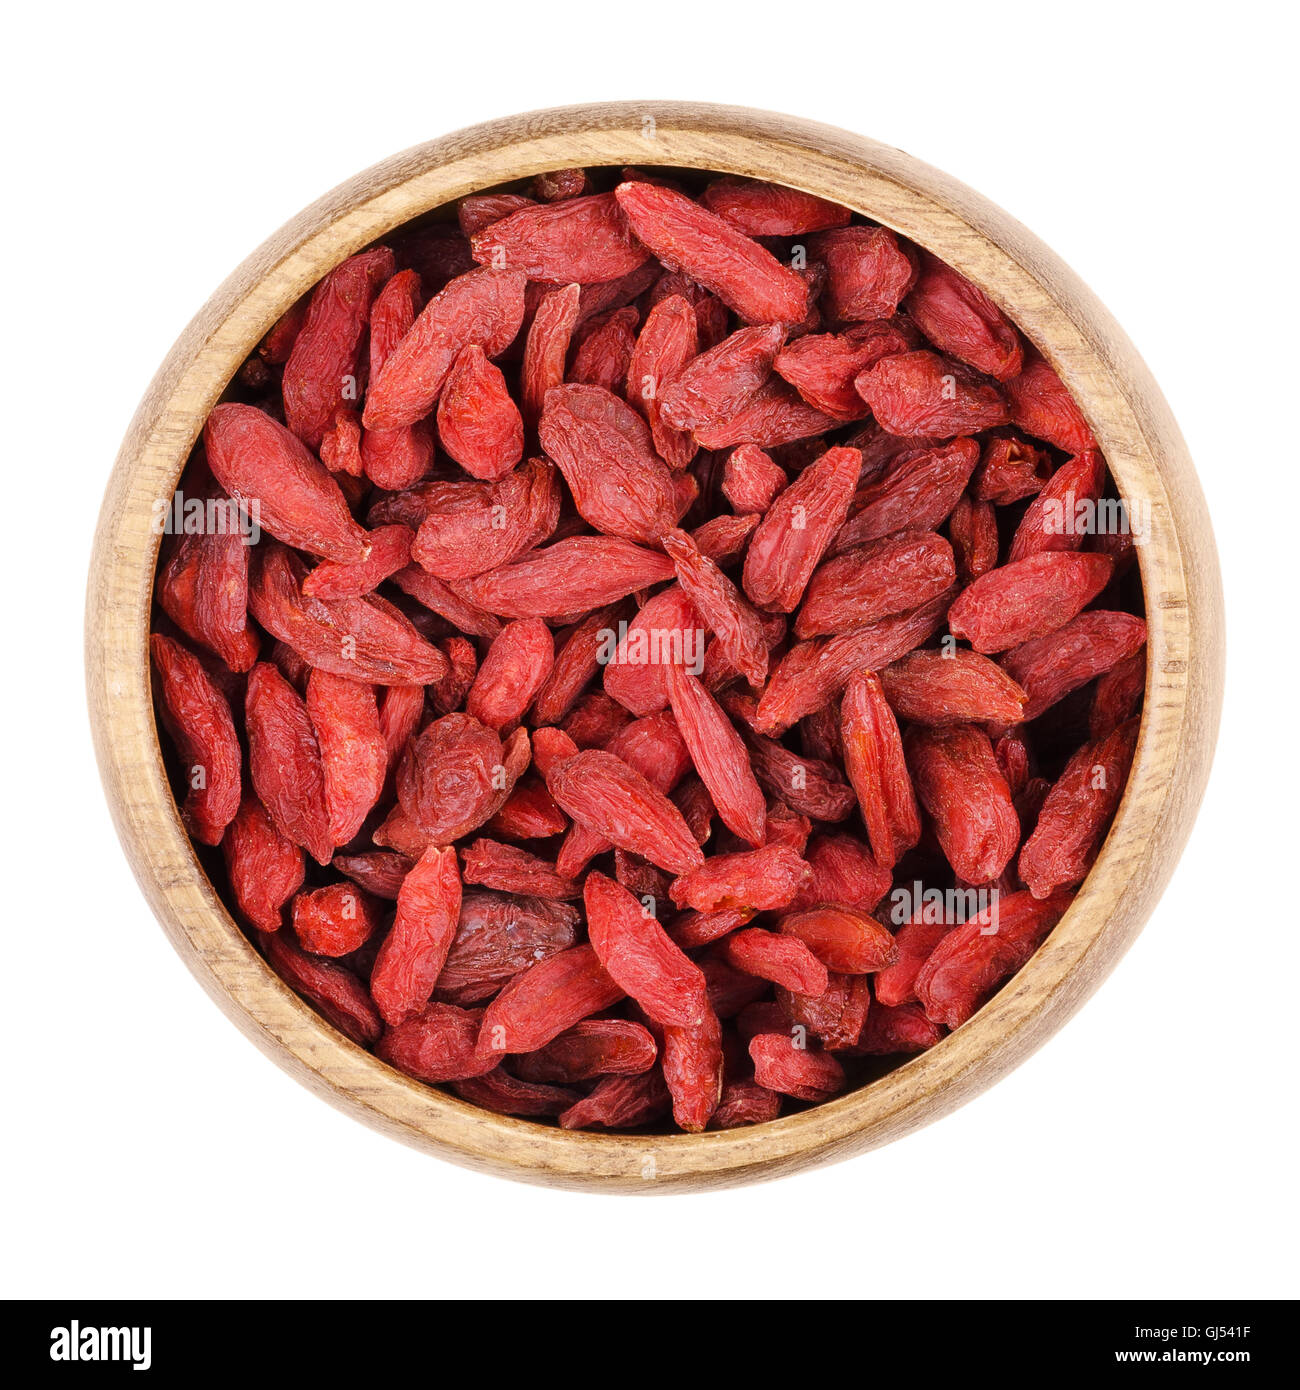 Goji berries in a bowl on white background, also called wolfberry. Dried red fruits and seeds of Lycium barbarum. Stock Photo